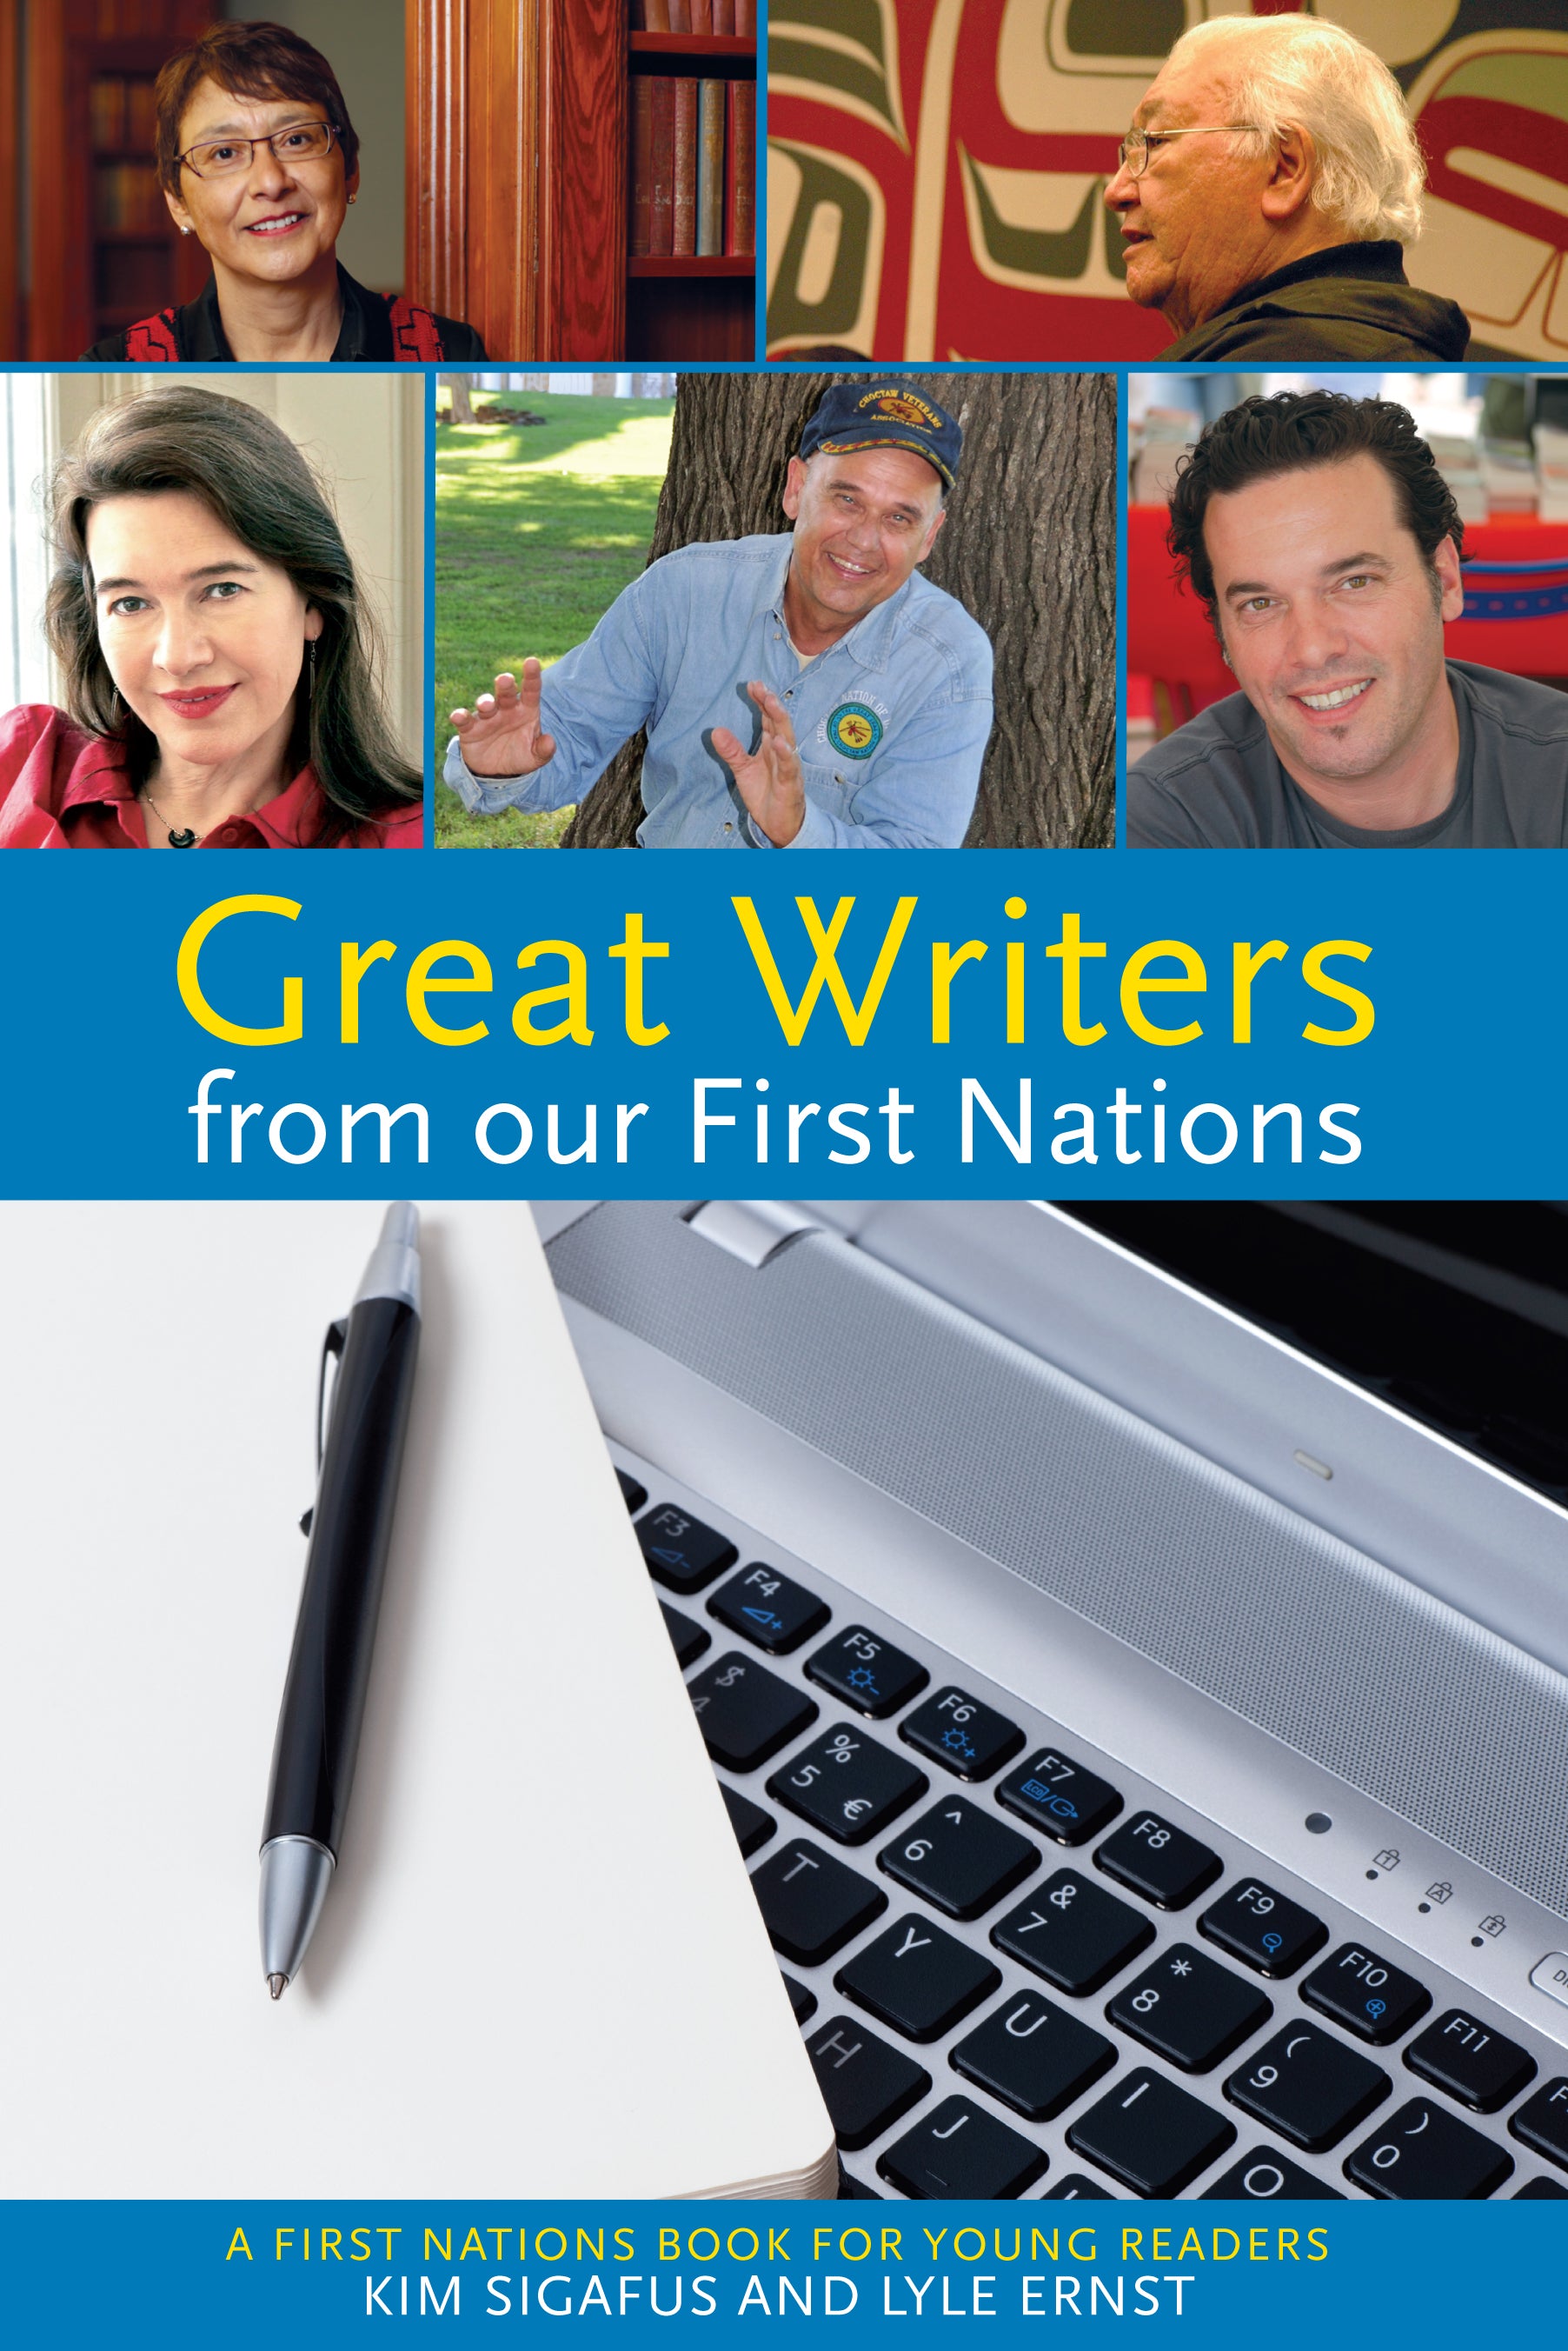 Great Writers from our First Nations-ebook